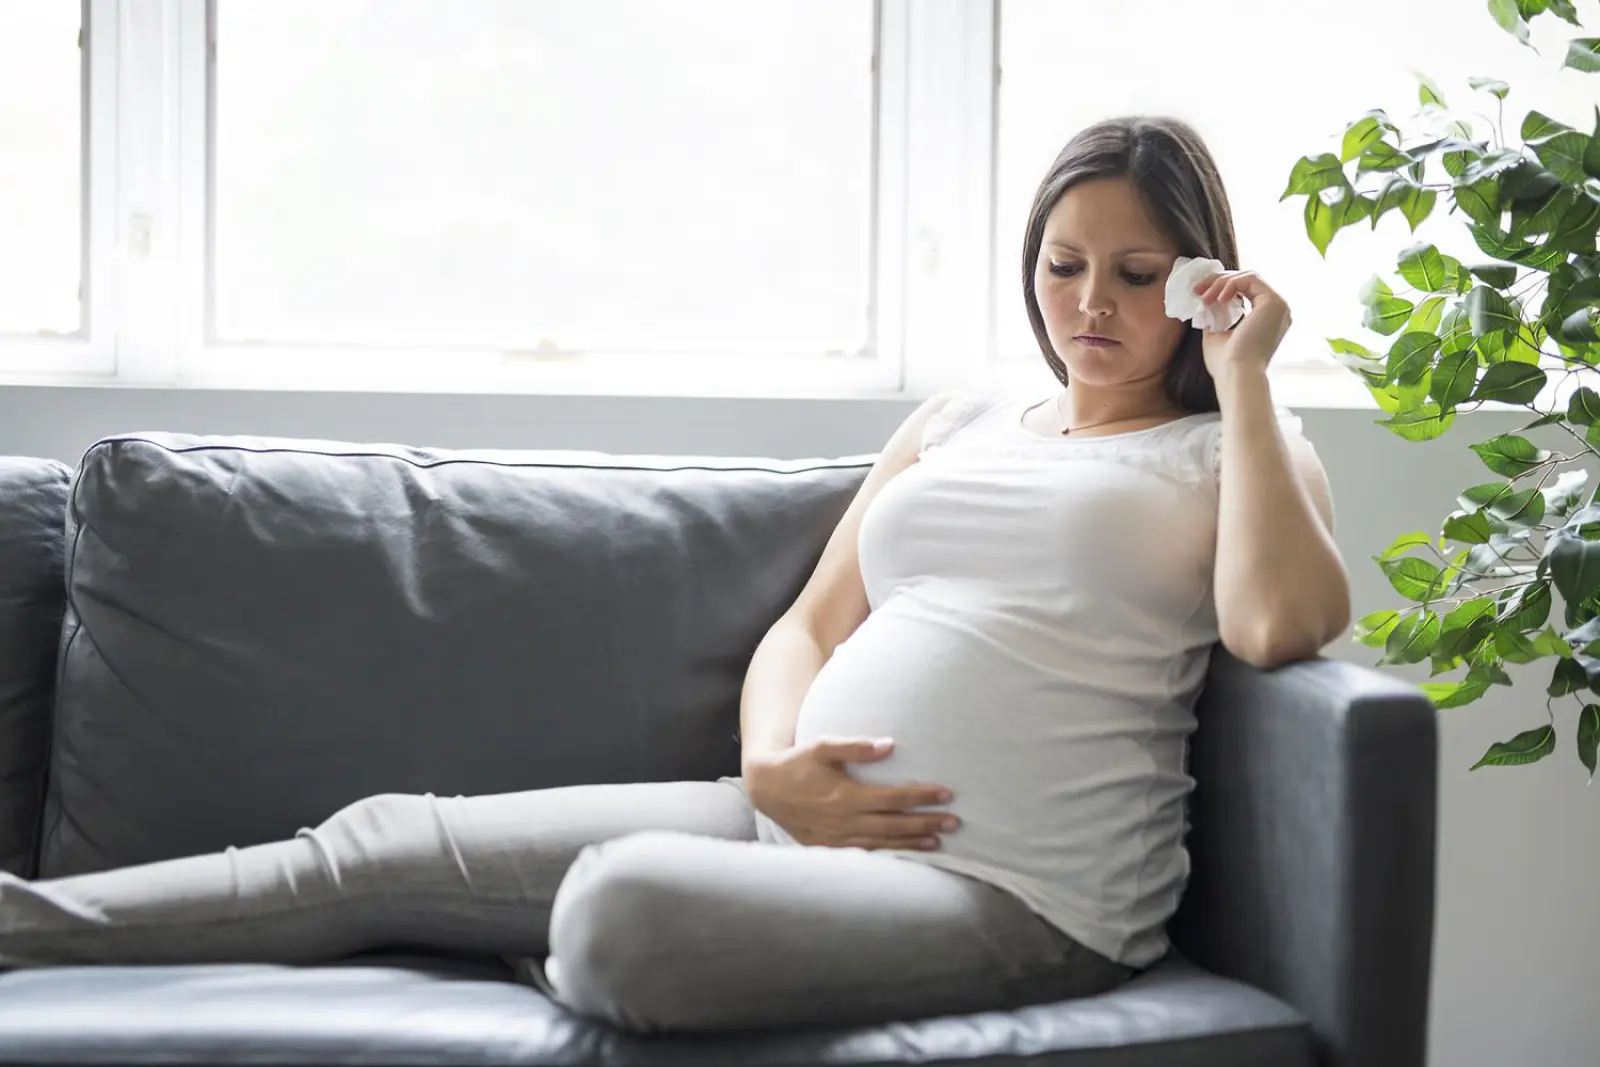 Know which app will prove to be helpful for pregnant women, will help prevent depression